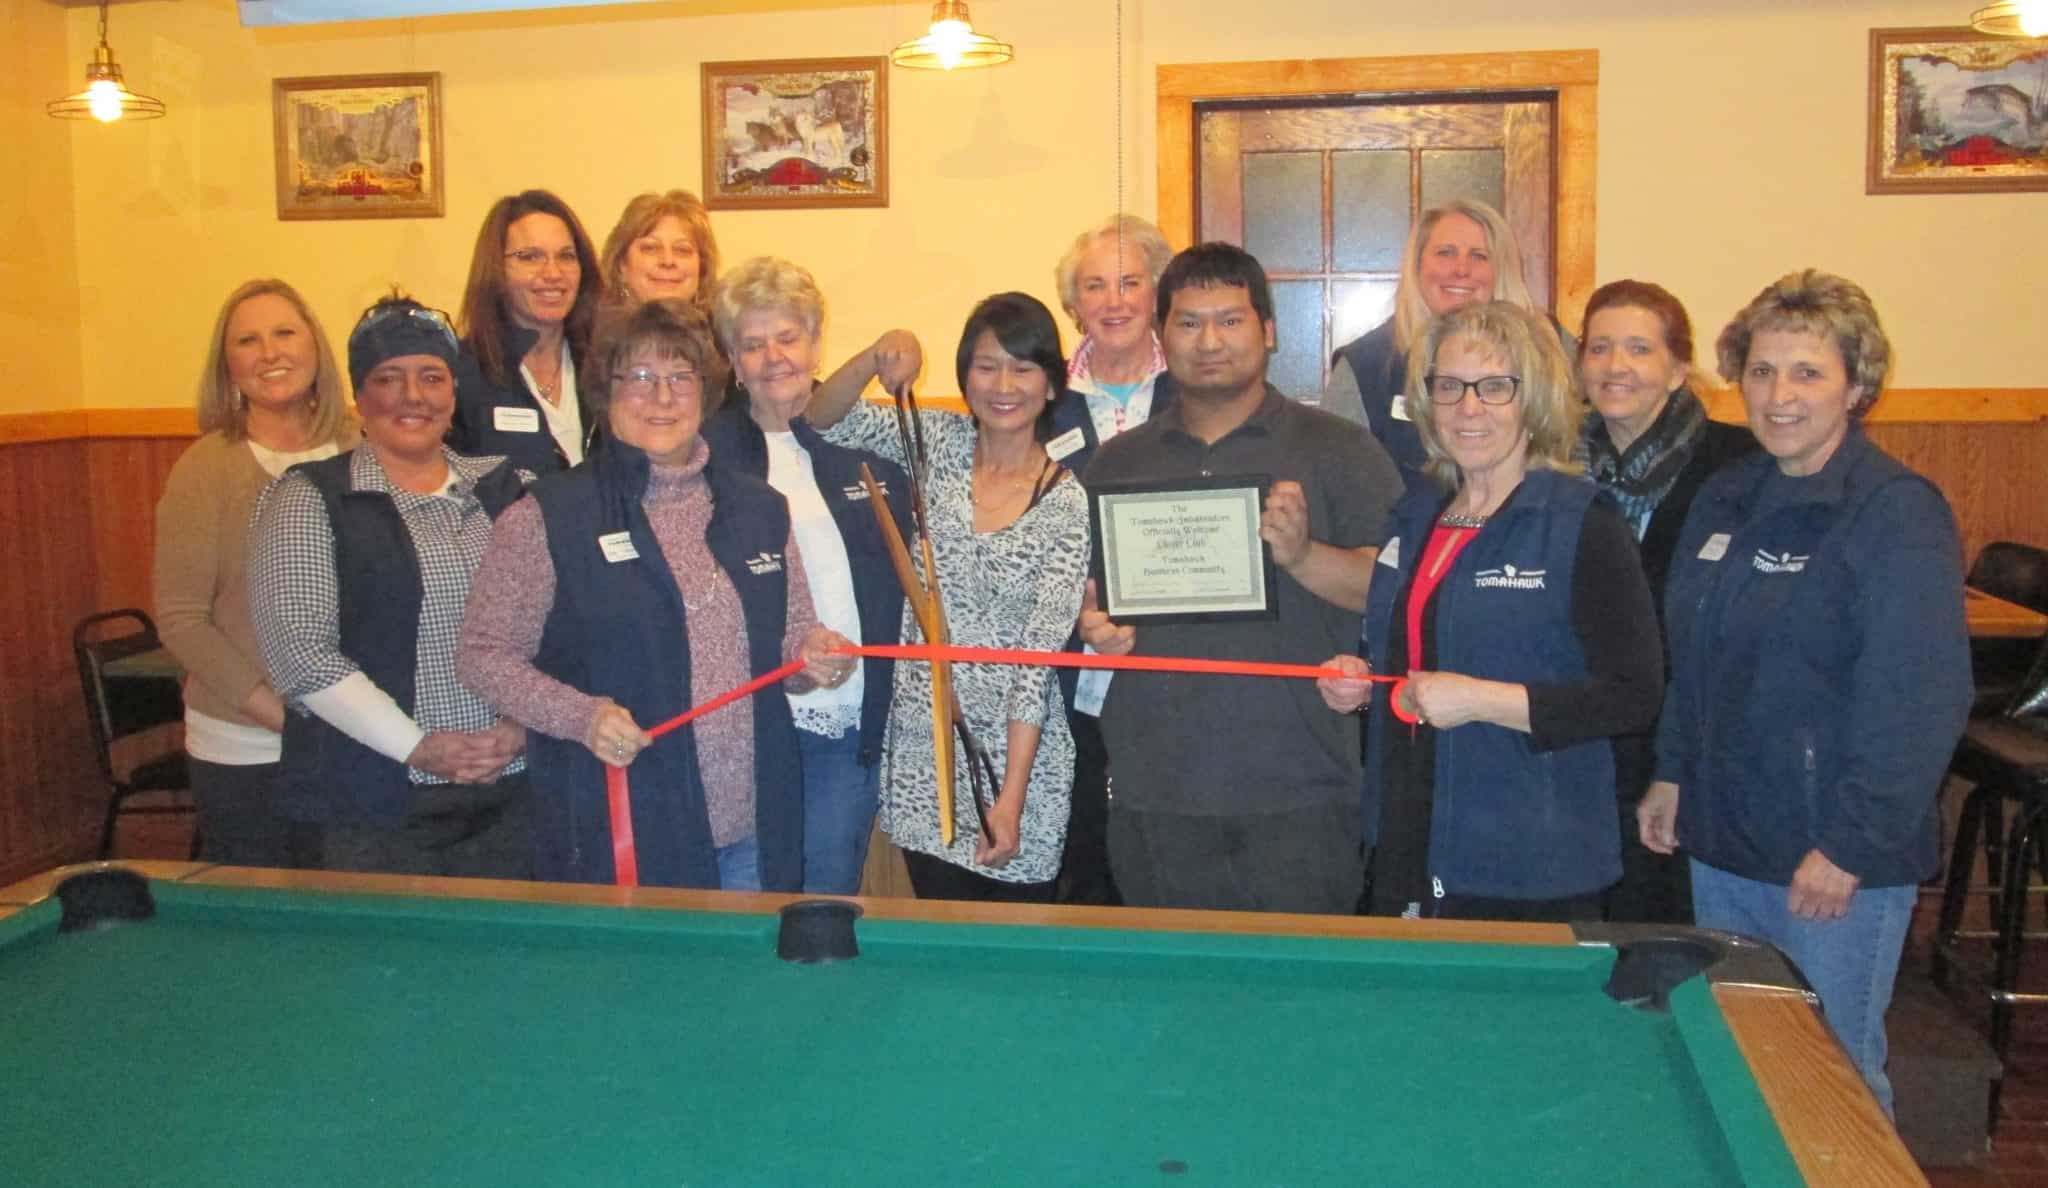 Tomahawk Ambassadors welcome Clover Club Thai Restaurant Bar and Grill to community